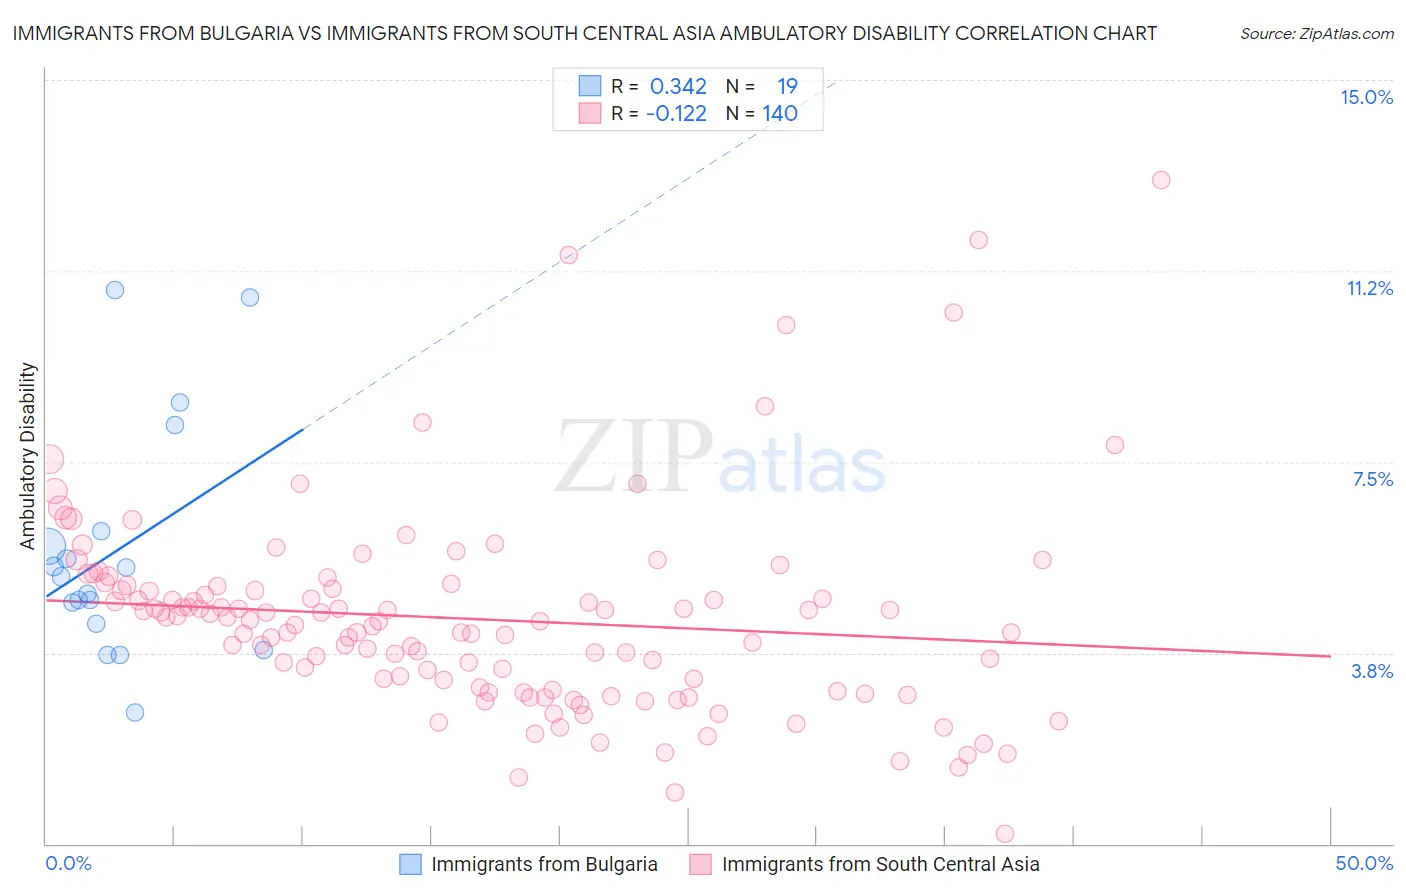 Immigrants from Bulgaria vs Immigrants from South Central Asia Ambulatory Disability